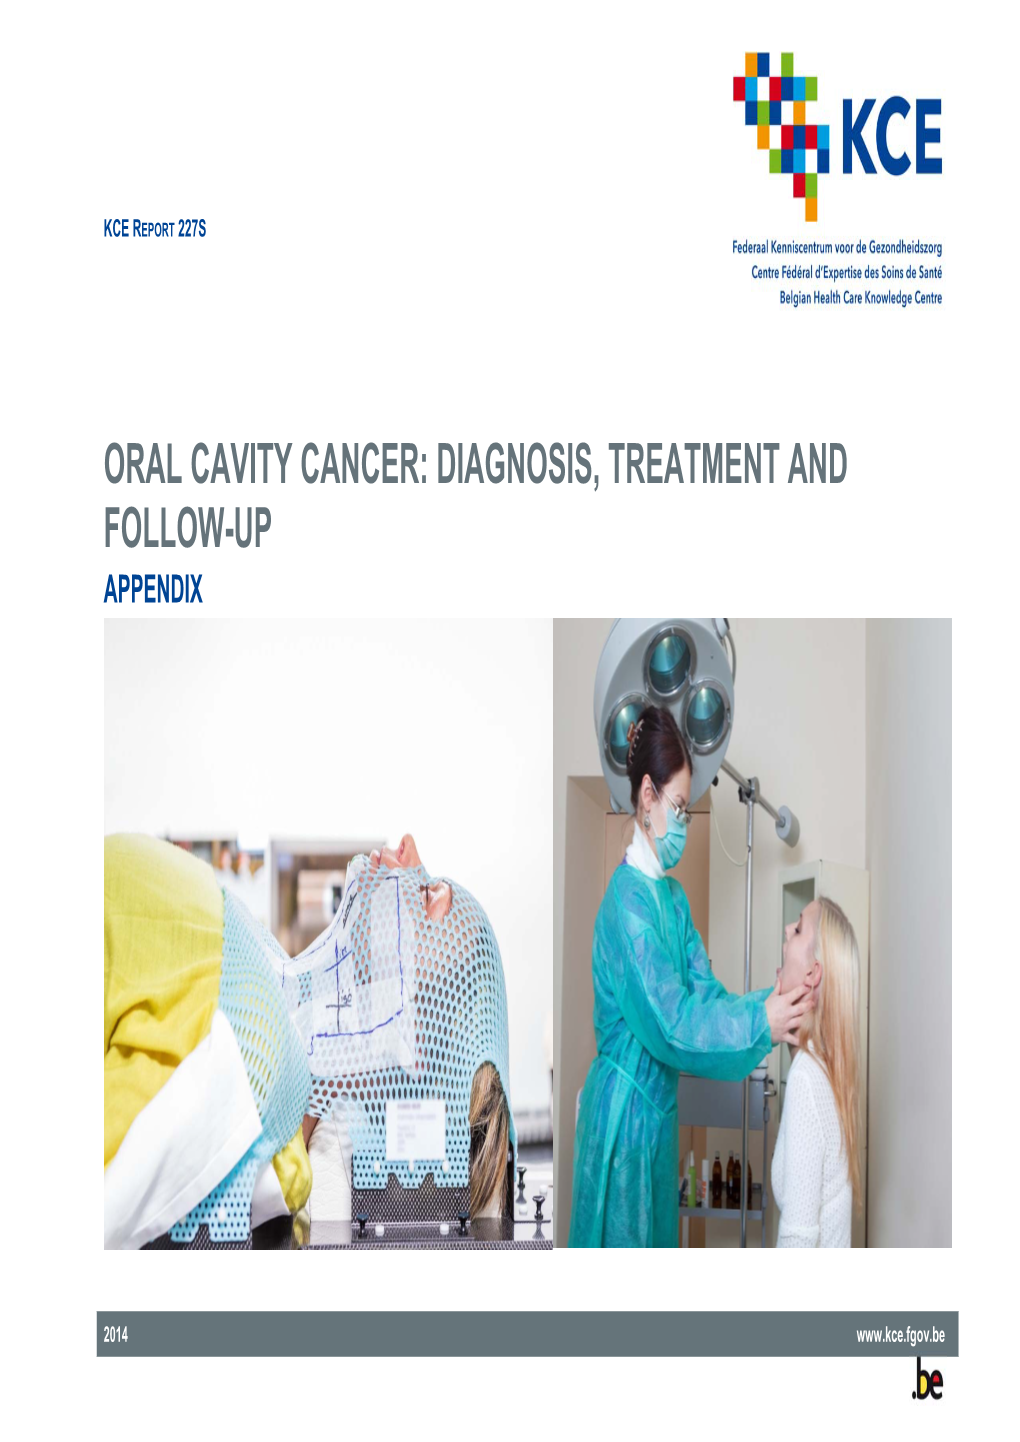 Oral Cavity Cancer: Diagnosis, Treatment and Follow-Up Appendix